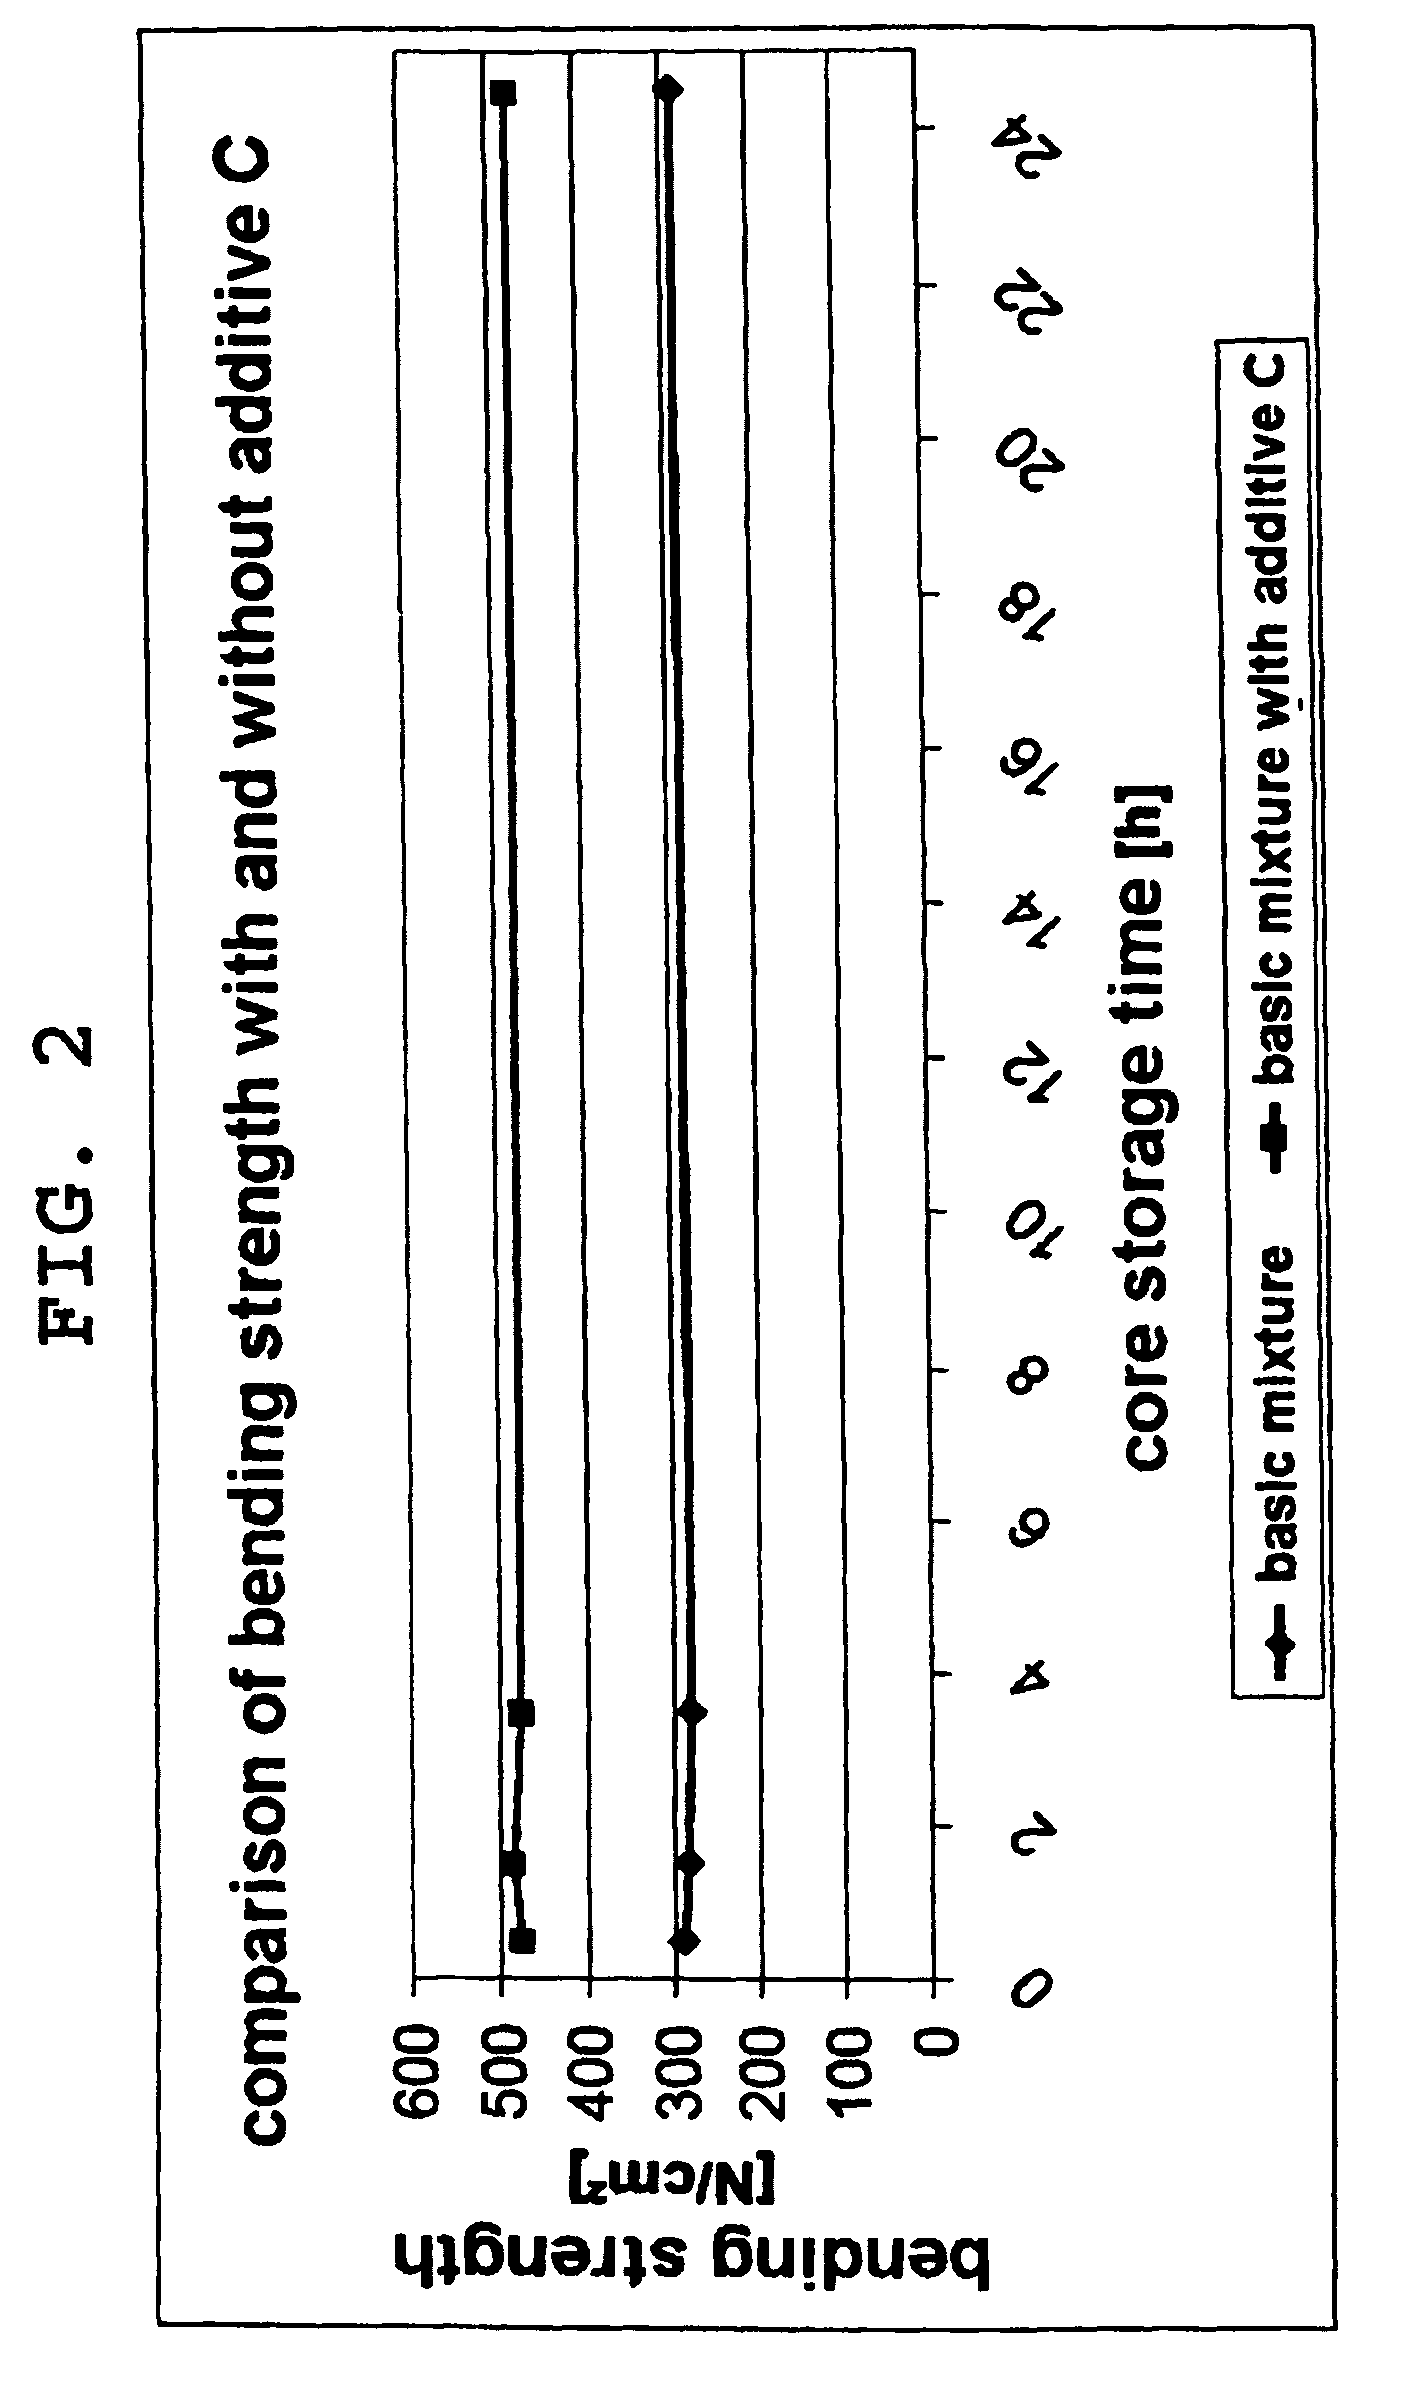 Molding material mixture, molded part for foundry purposes and process of producing a molded part